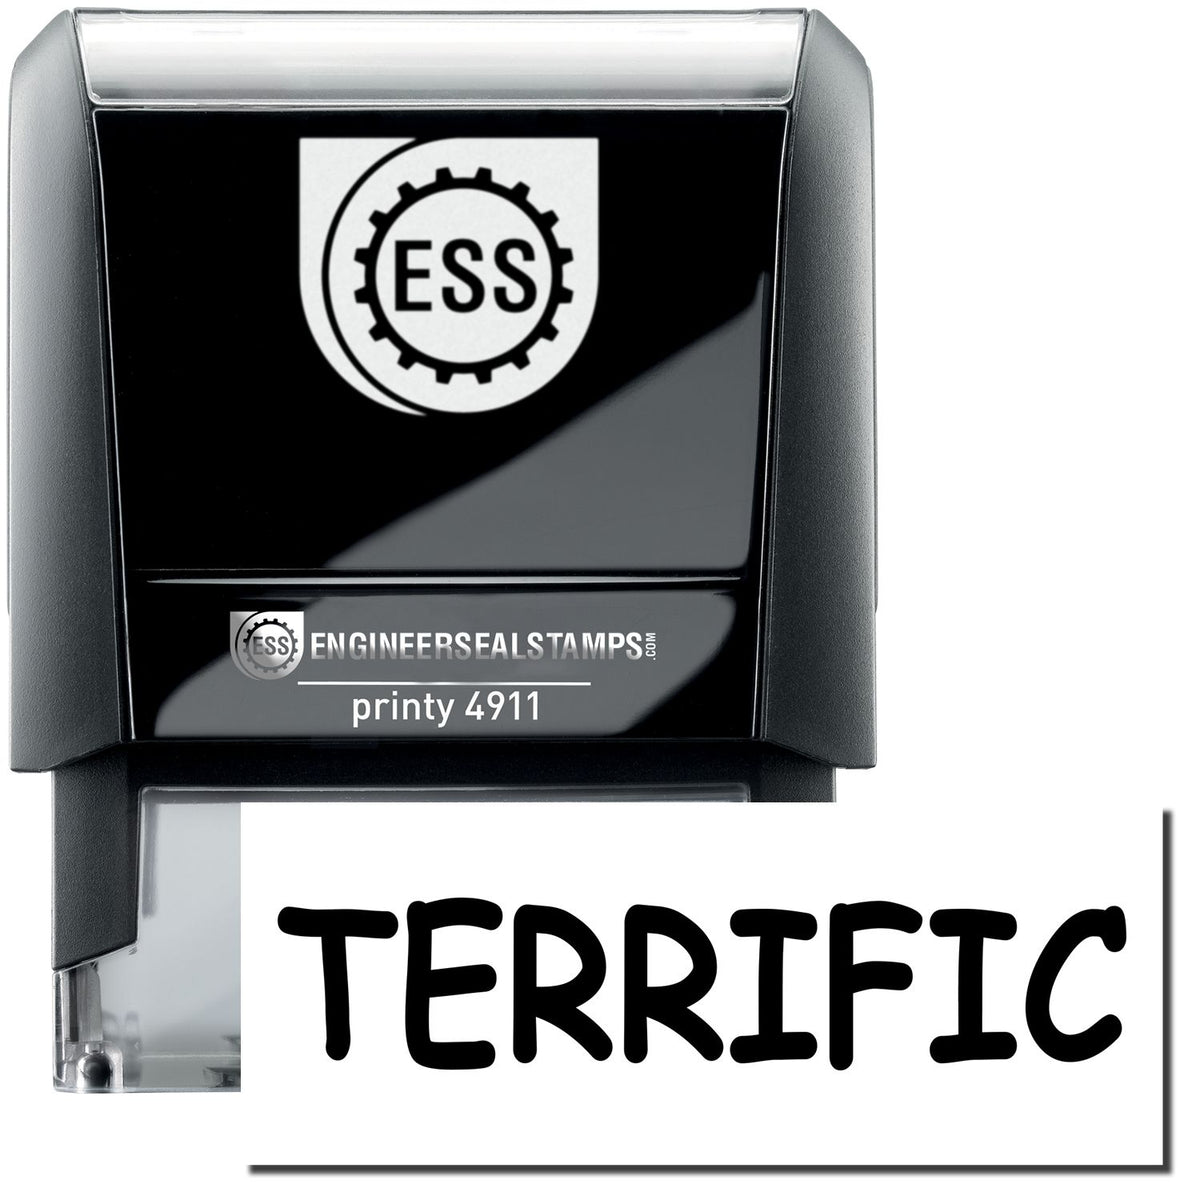 A self-inking stamp with a stamped image showing how the text &quot;TERRIFIC&quot; is displayed after stamping.